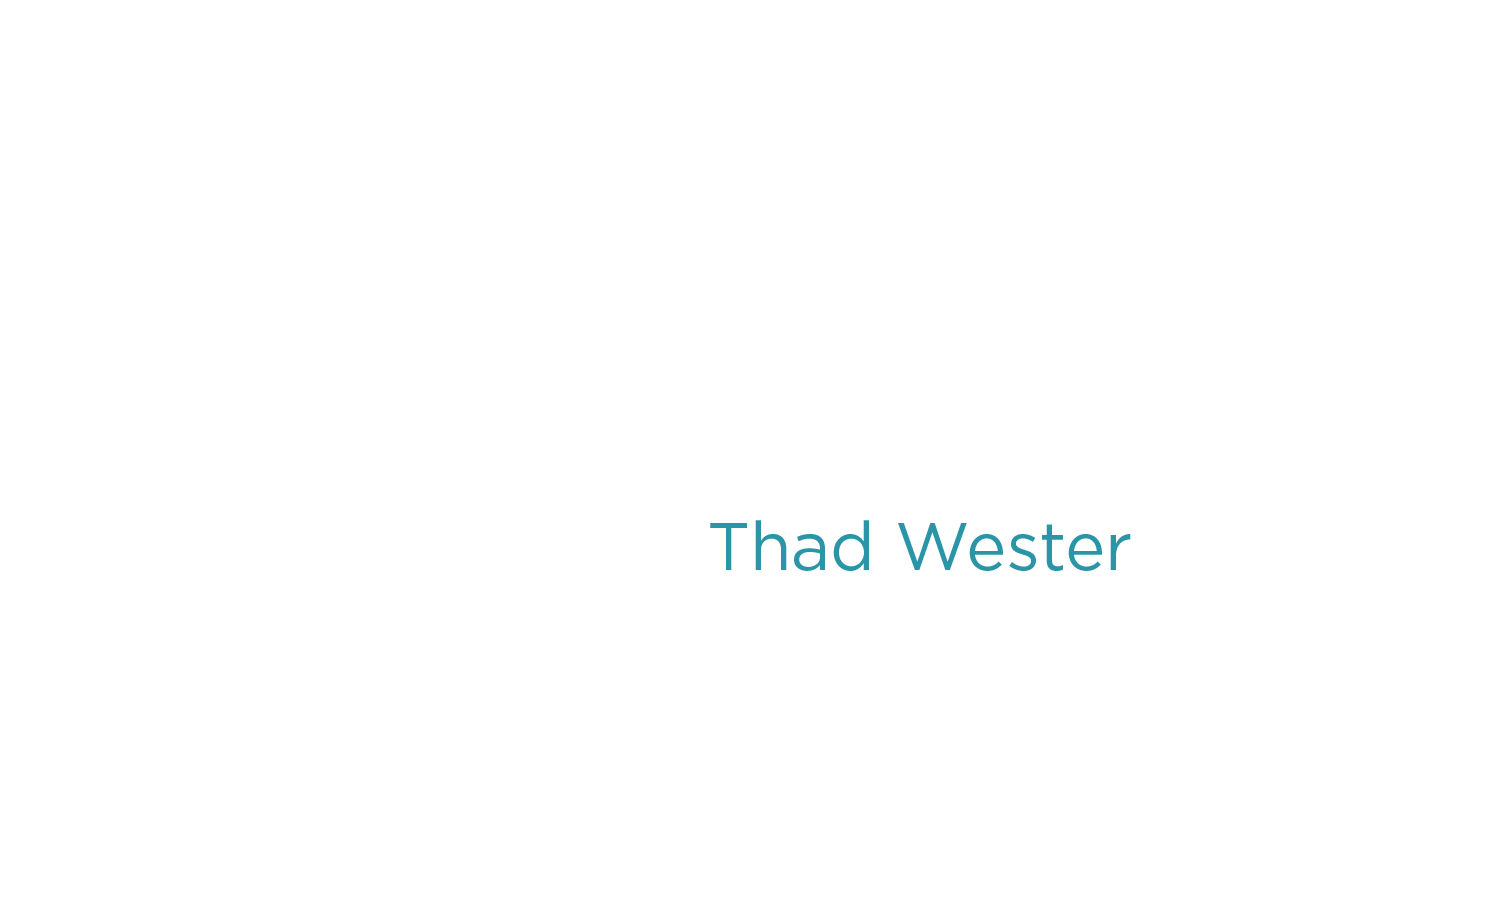 Thad Wester - Thad Wester